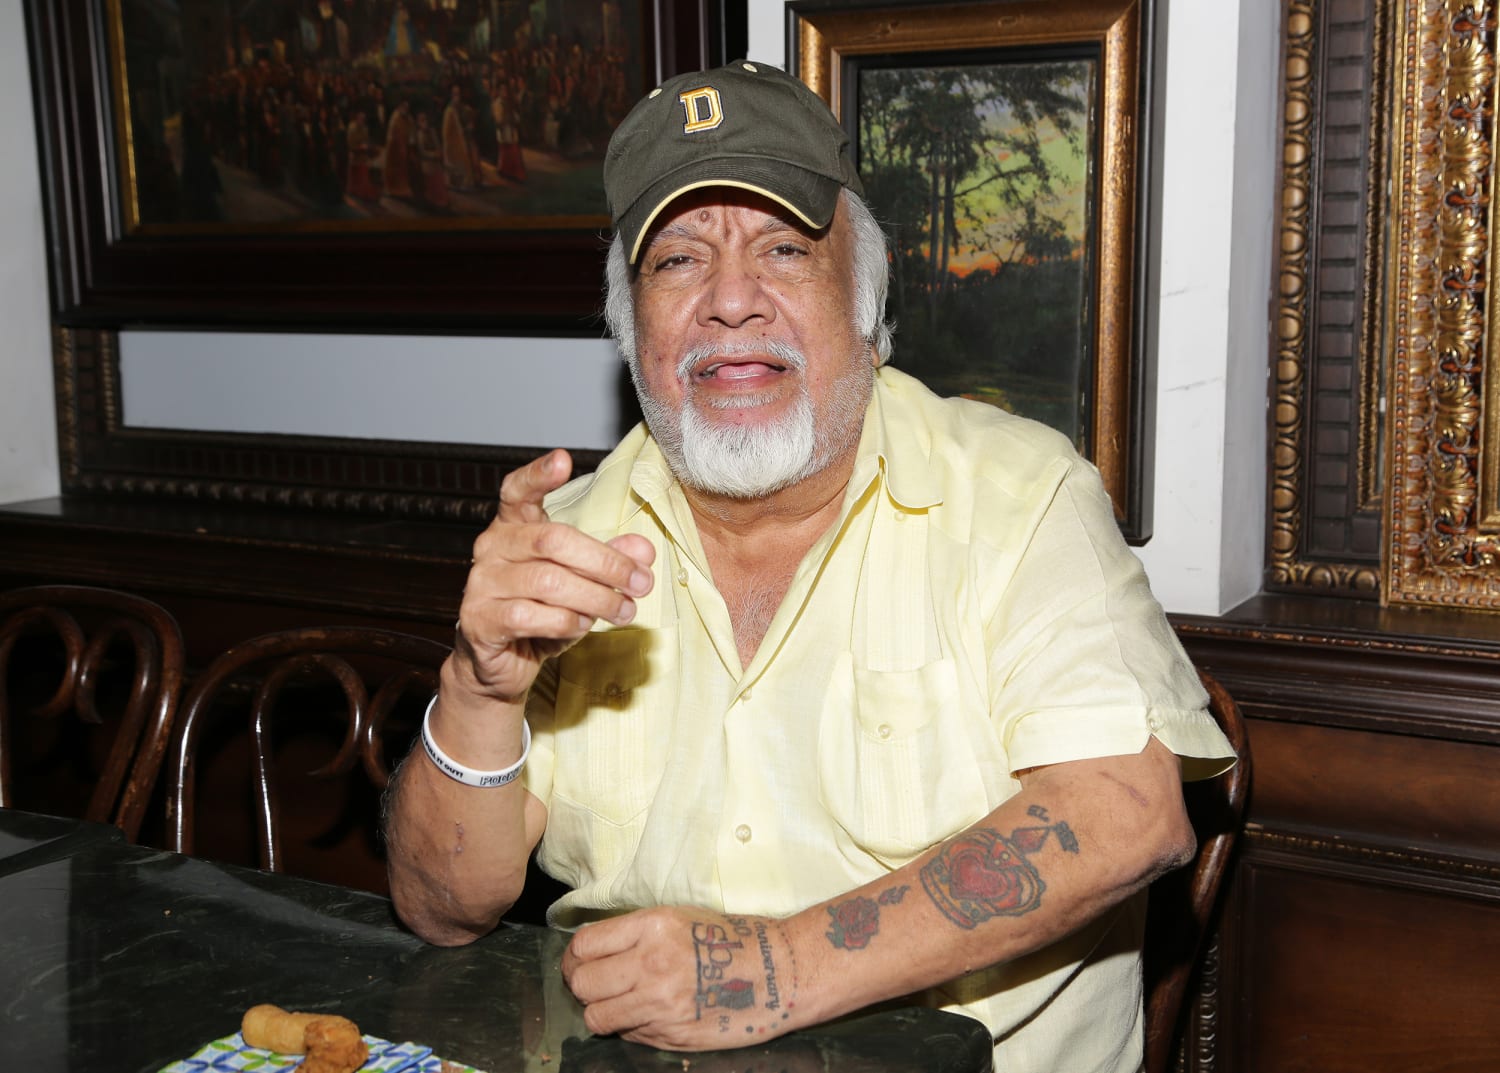 A radio icon who helped usher Latin music's rise is remembered